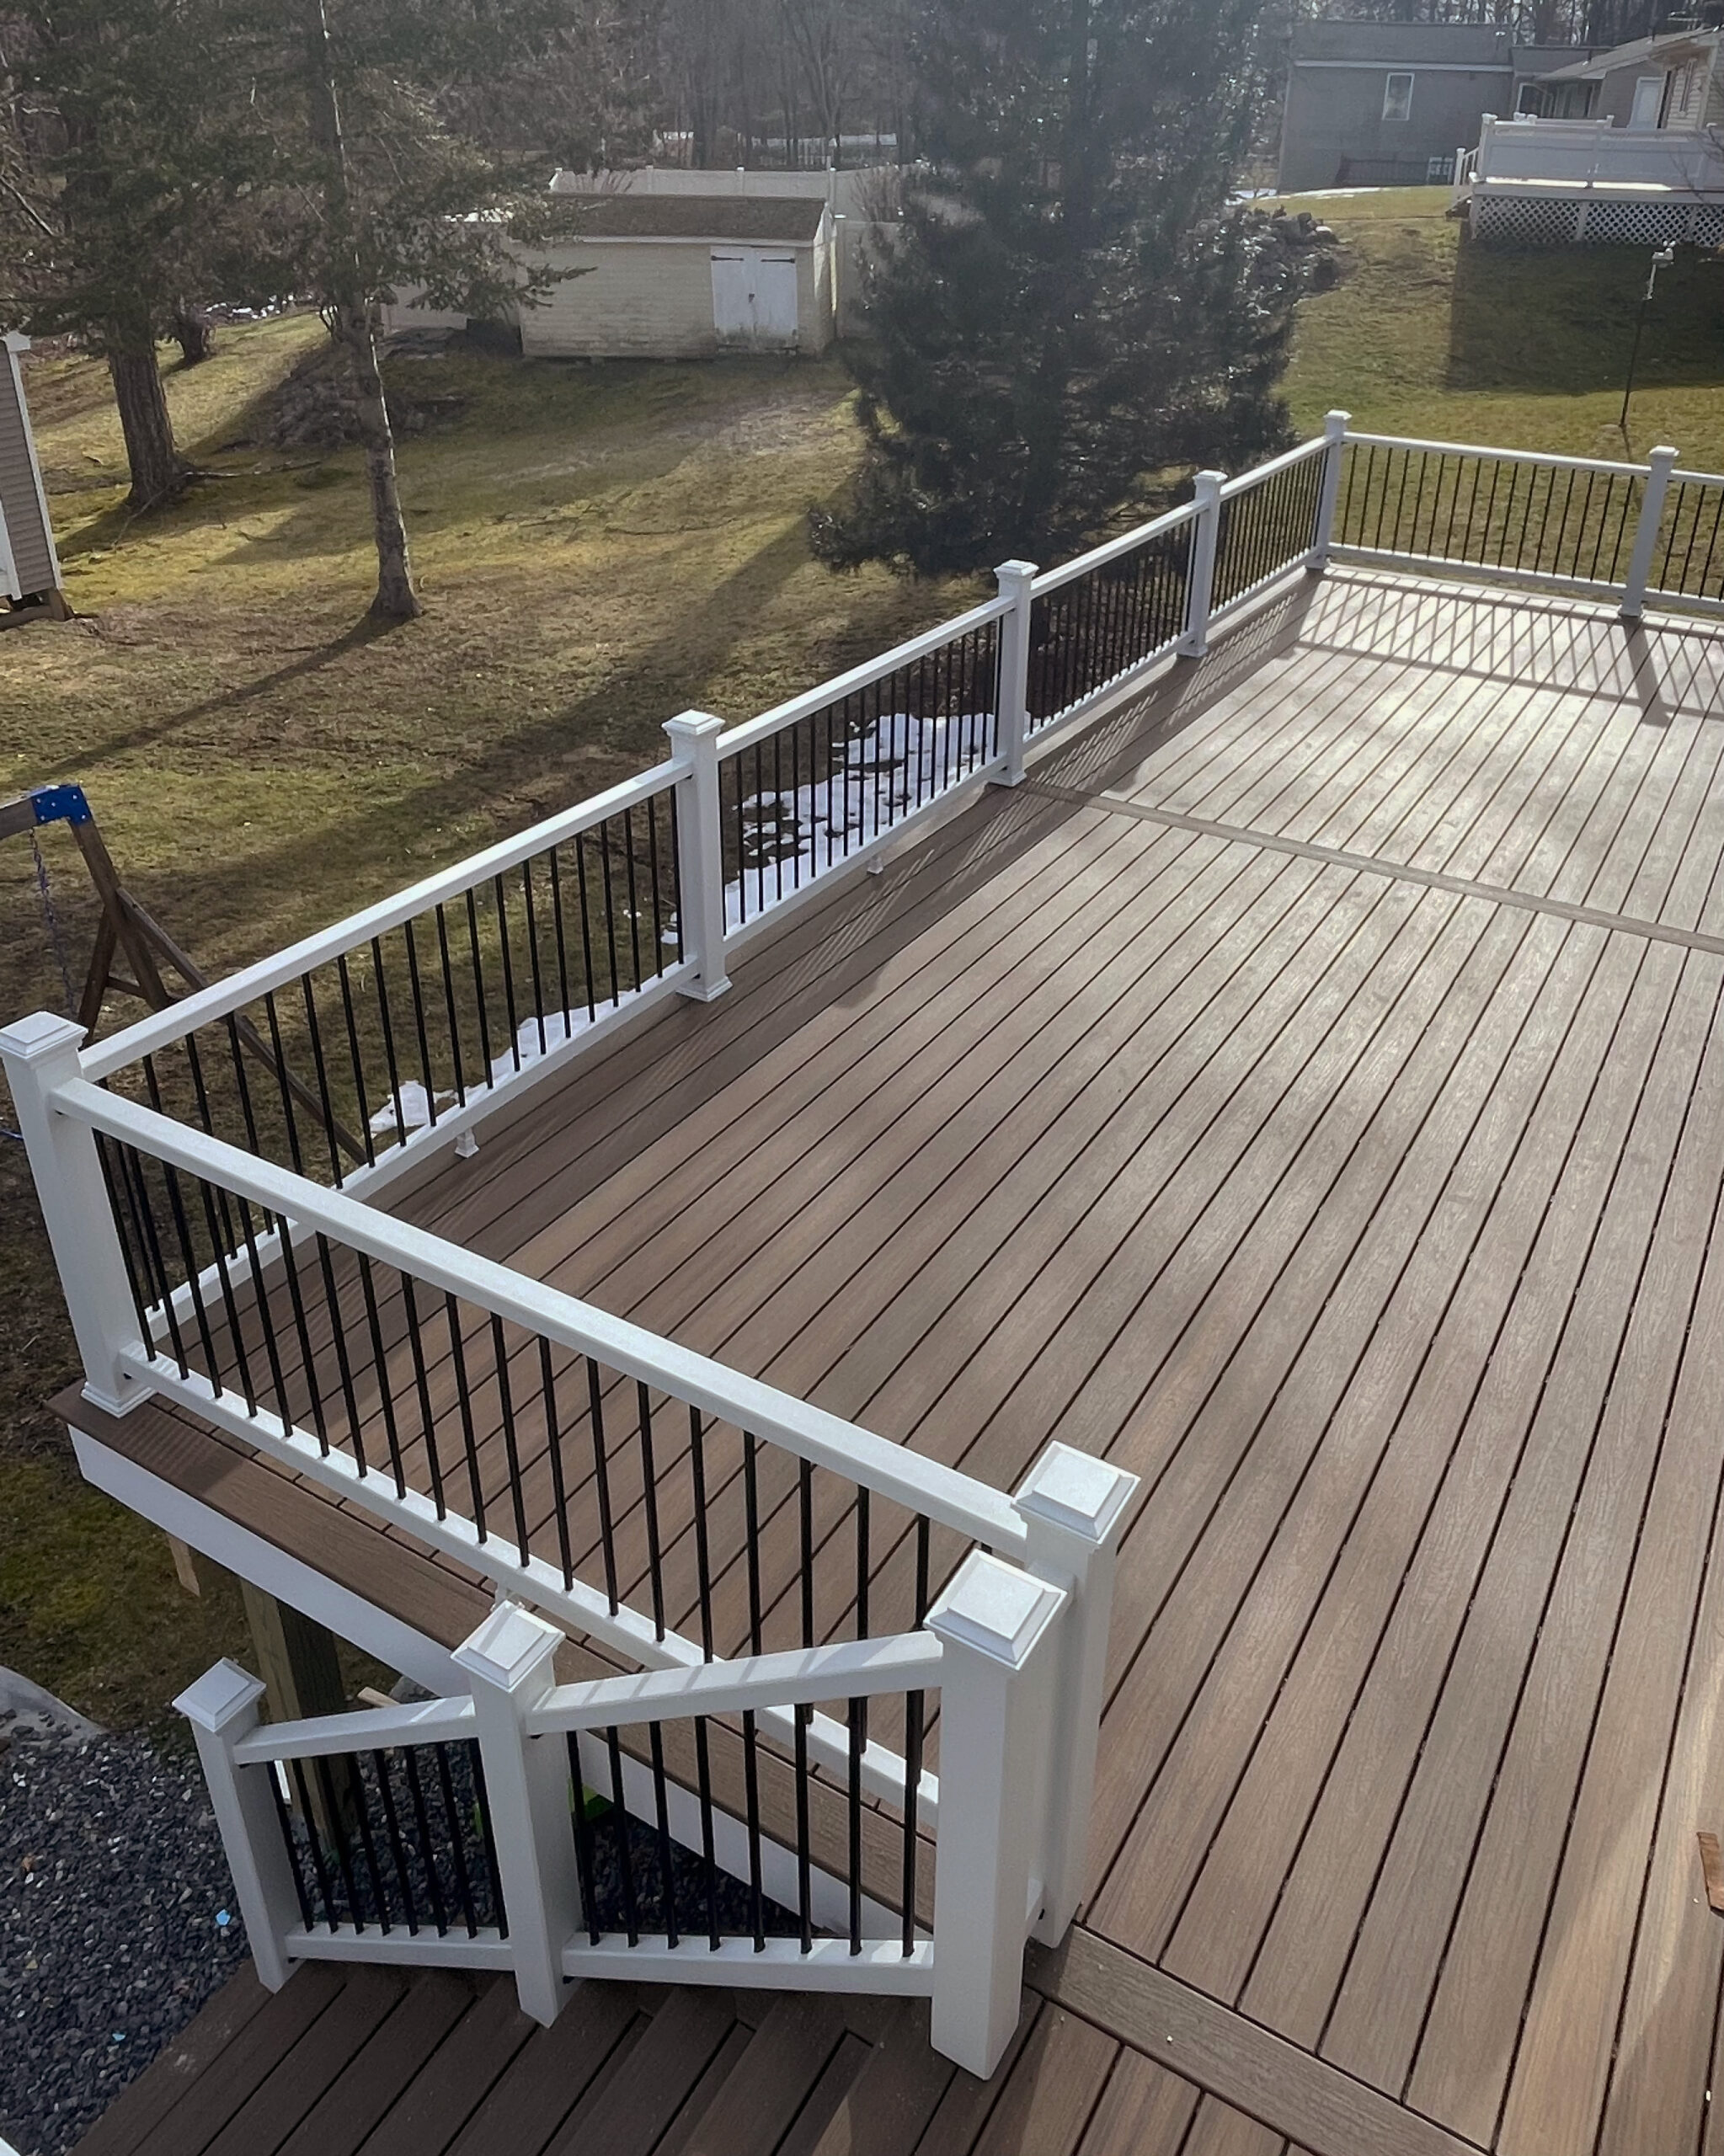 Trex composite decking in color Toasted Sand with Trex select railings in white with black balusters Holden MA deck